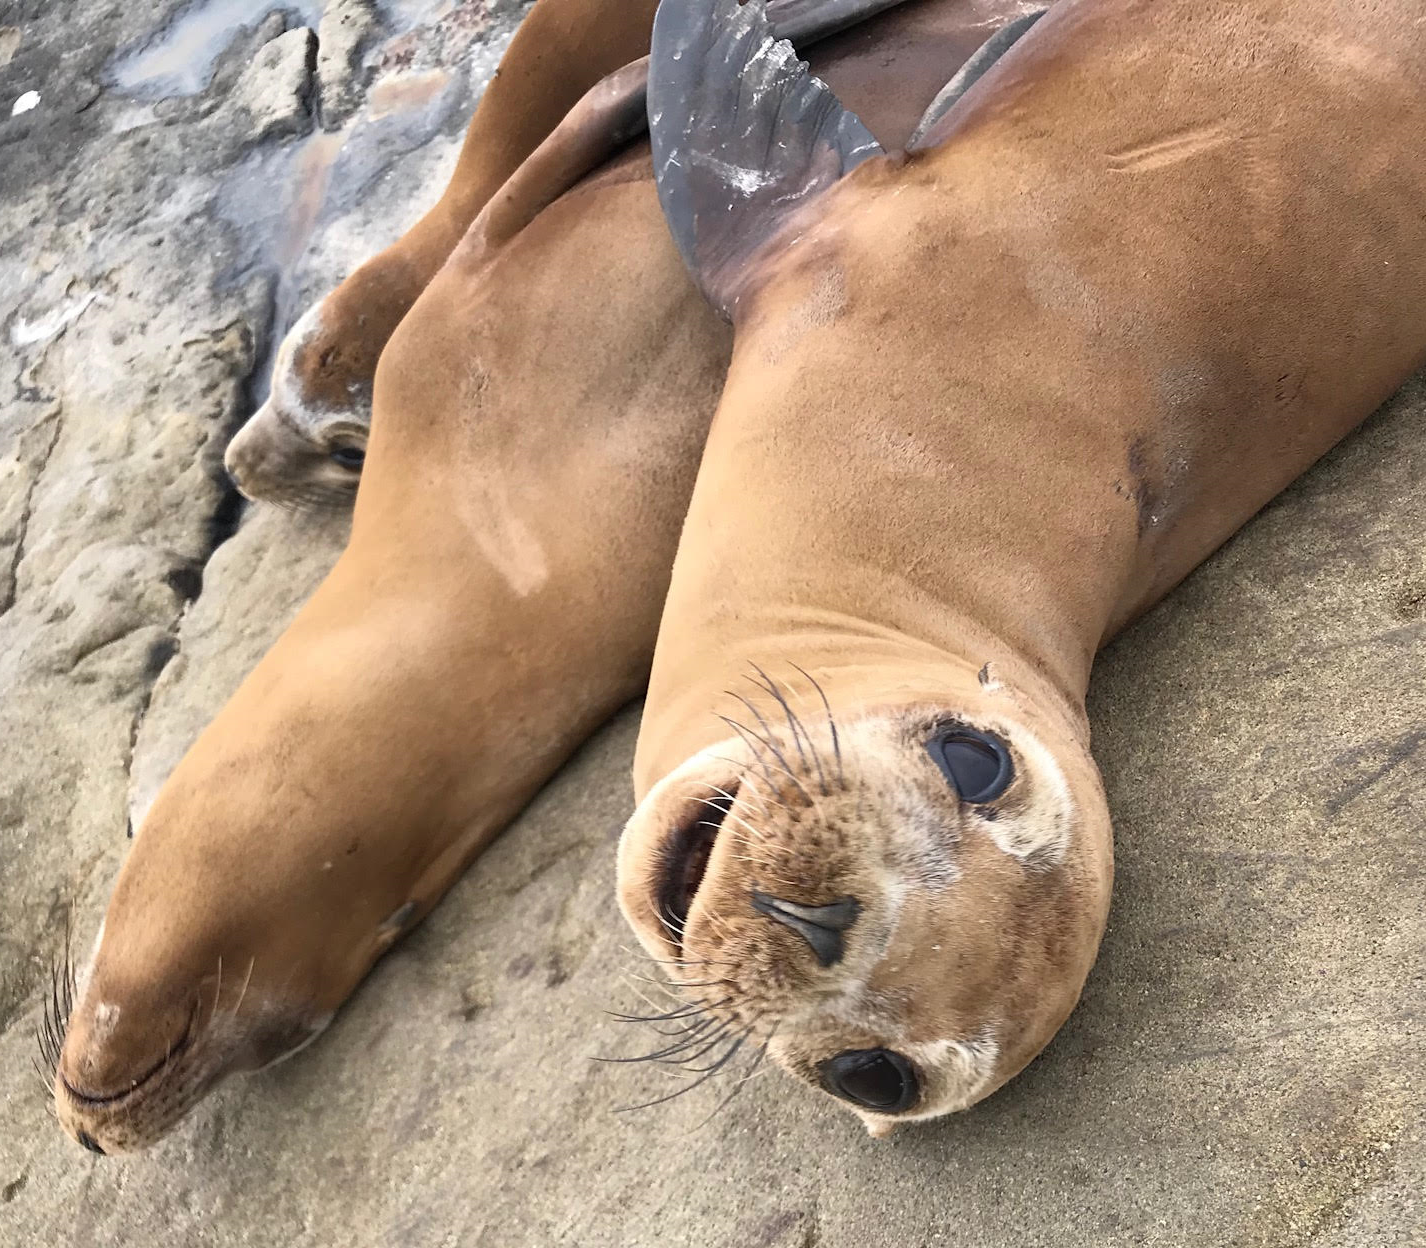 Small sea lion looks up into camera, laying on beach with two others.